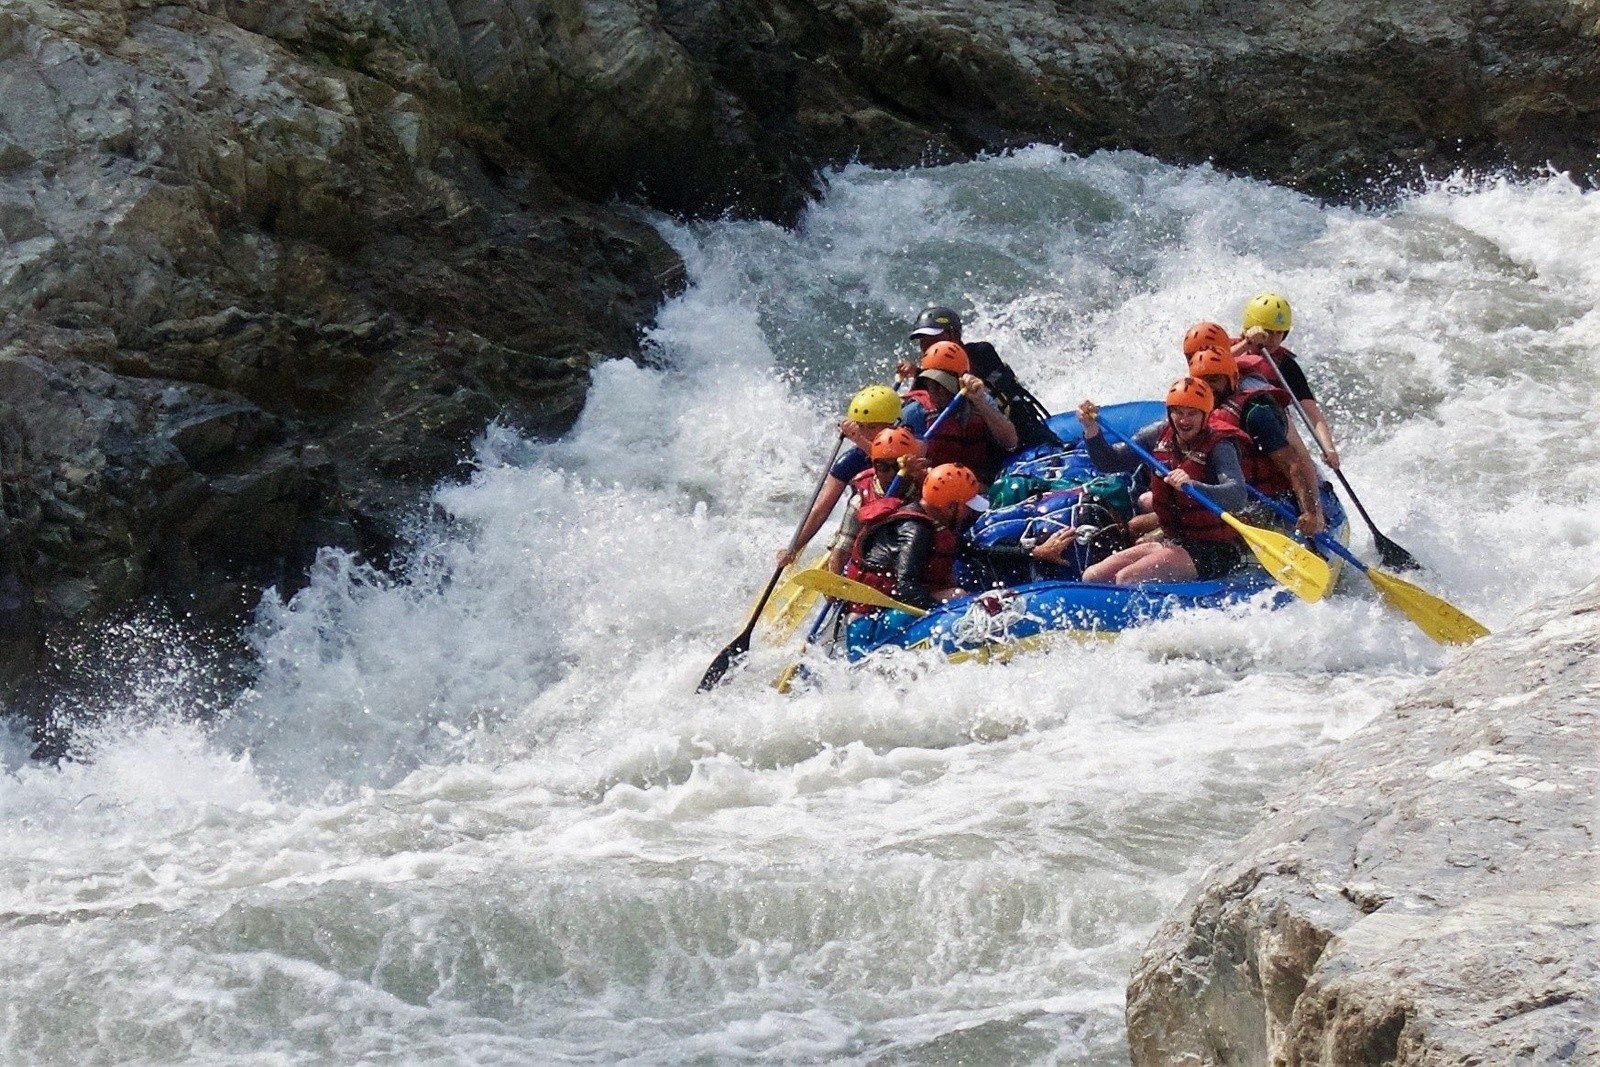 Taking on the white water of the Sun Kosi River.